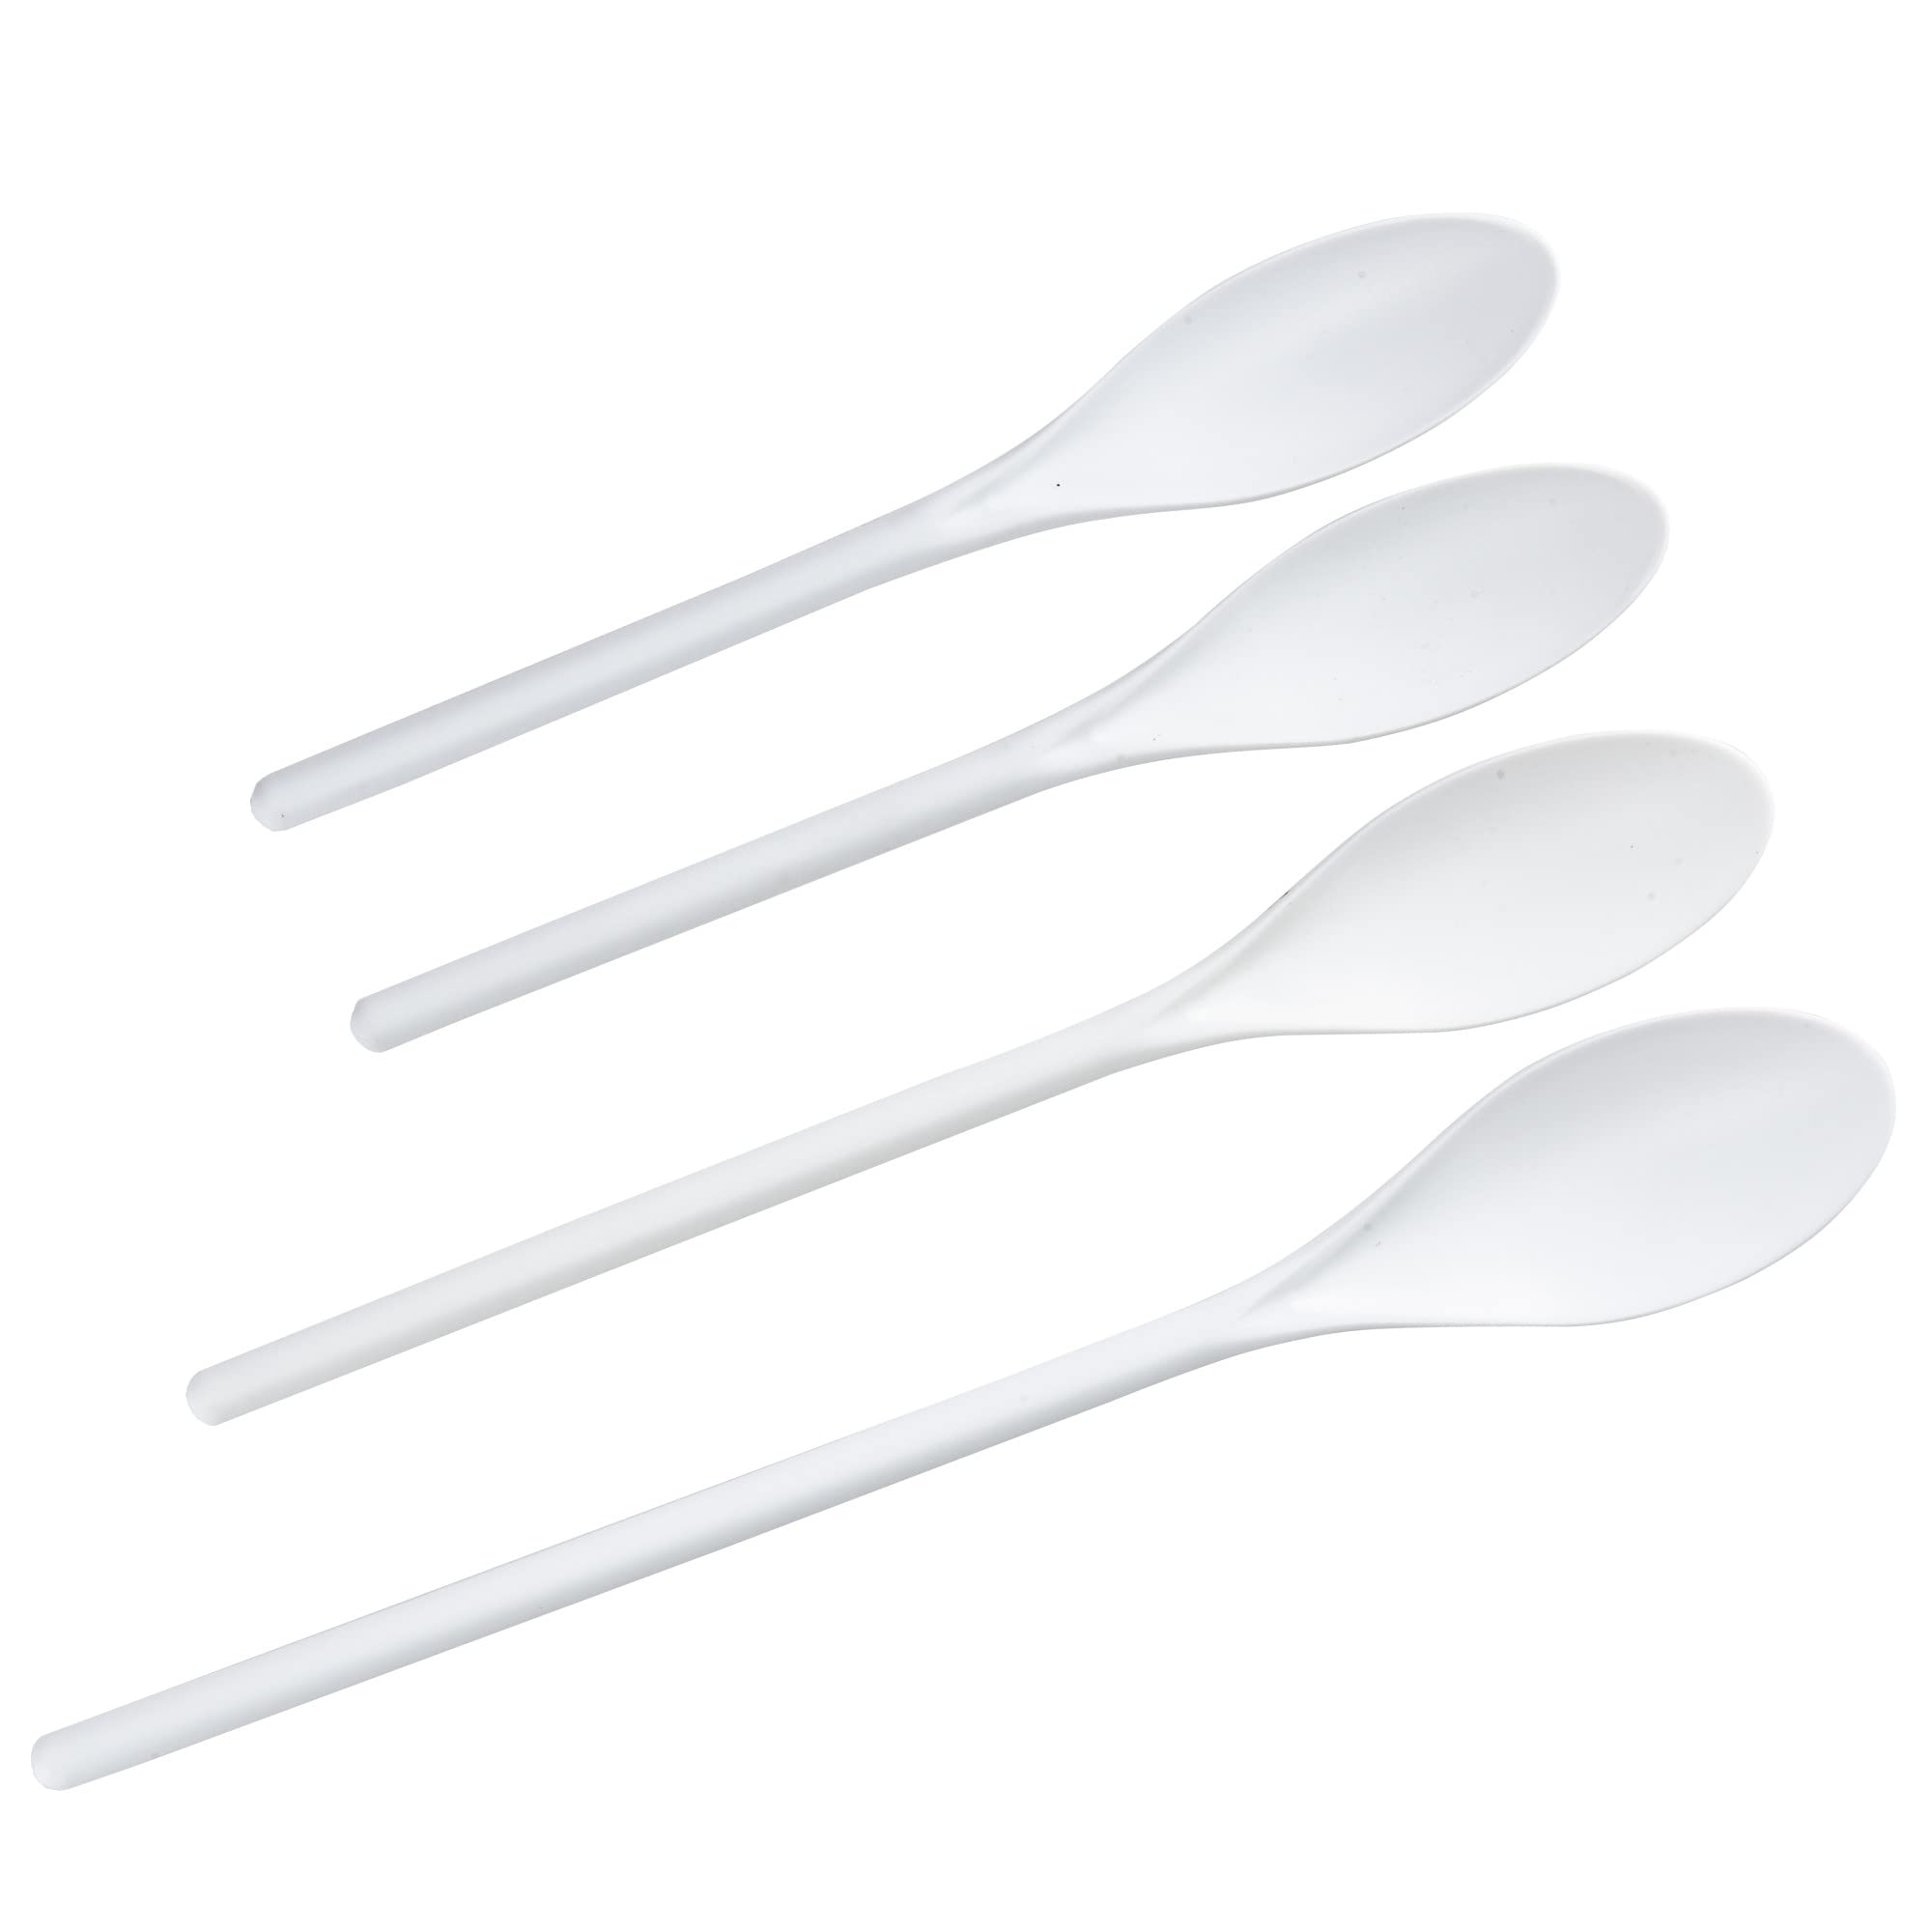 4-Piece Chef Craft Plastic Mixing Spoon Set (White) $2.29 + Free Shipping w/ Prime or on $35+